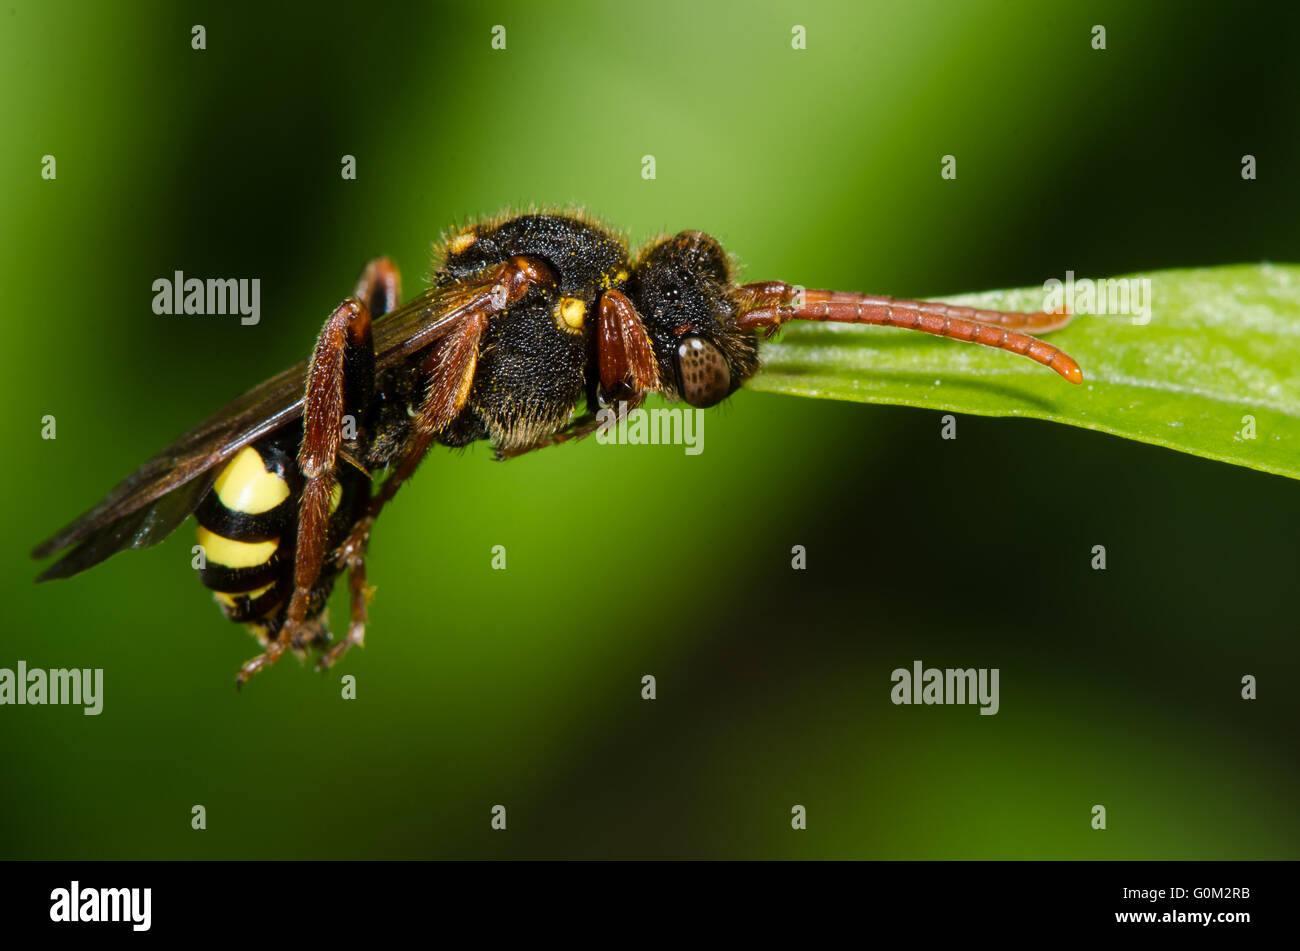 Nomad bee (Nomada sp.) gripping leaf with mandible. Unusual behaviour of wasp-like cleptoparasitic bee. Stock Photo